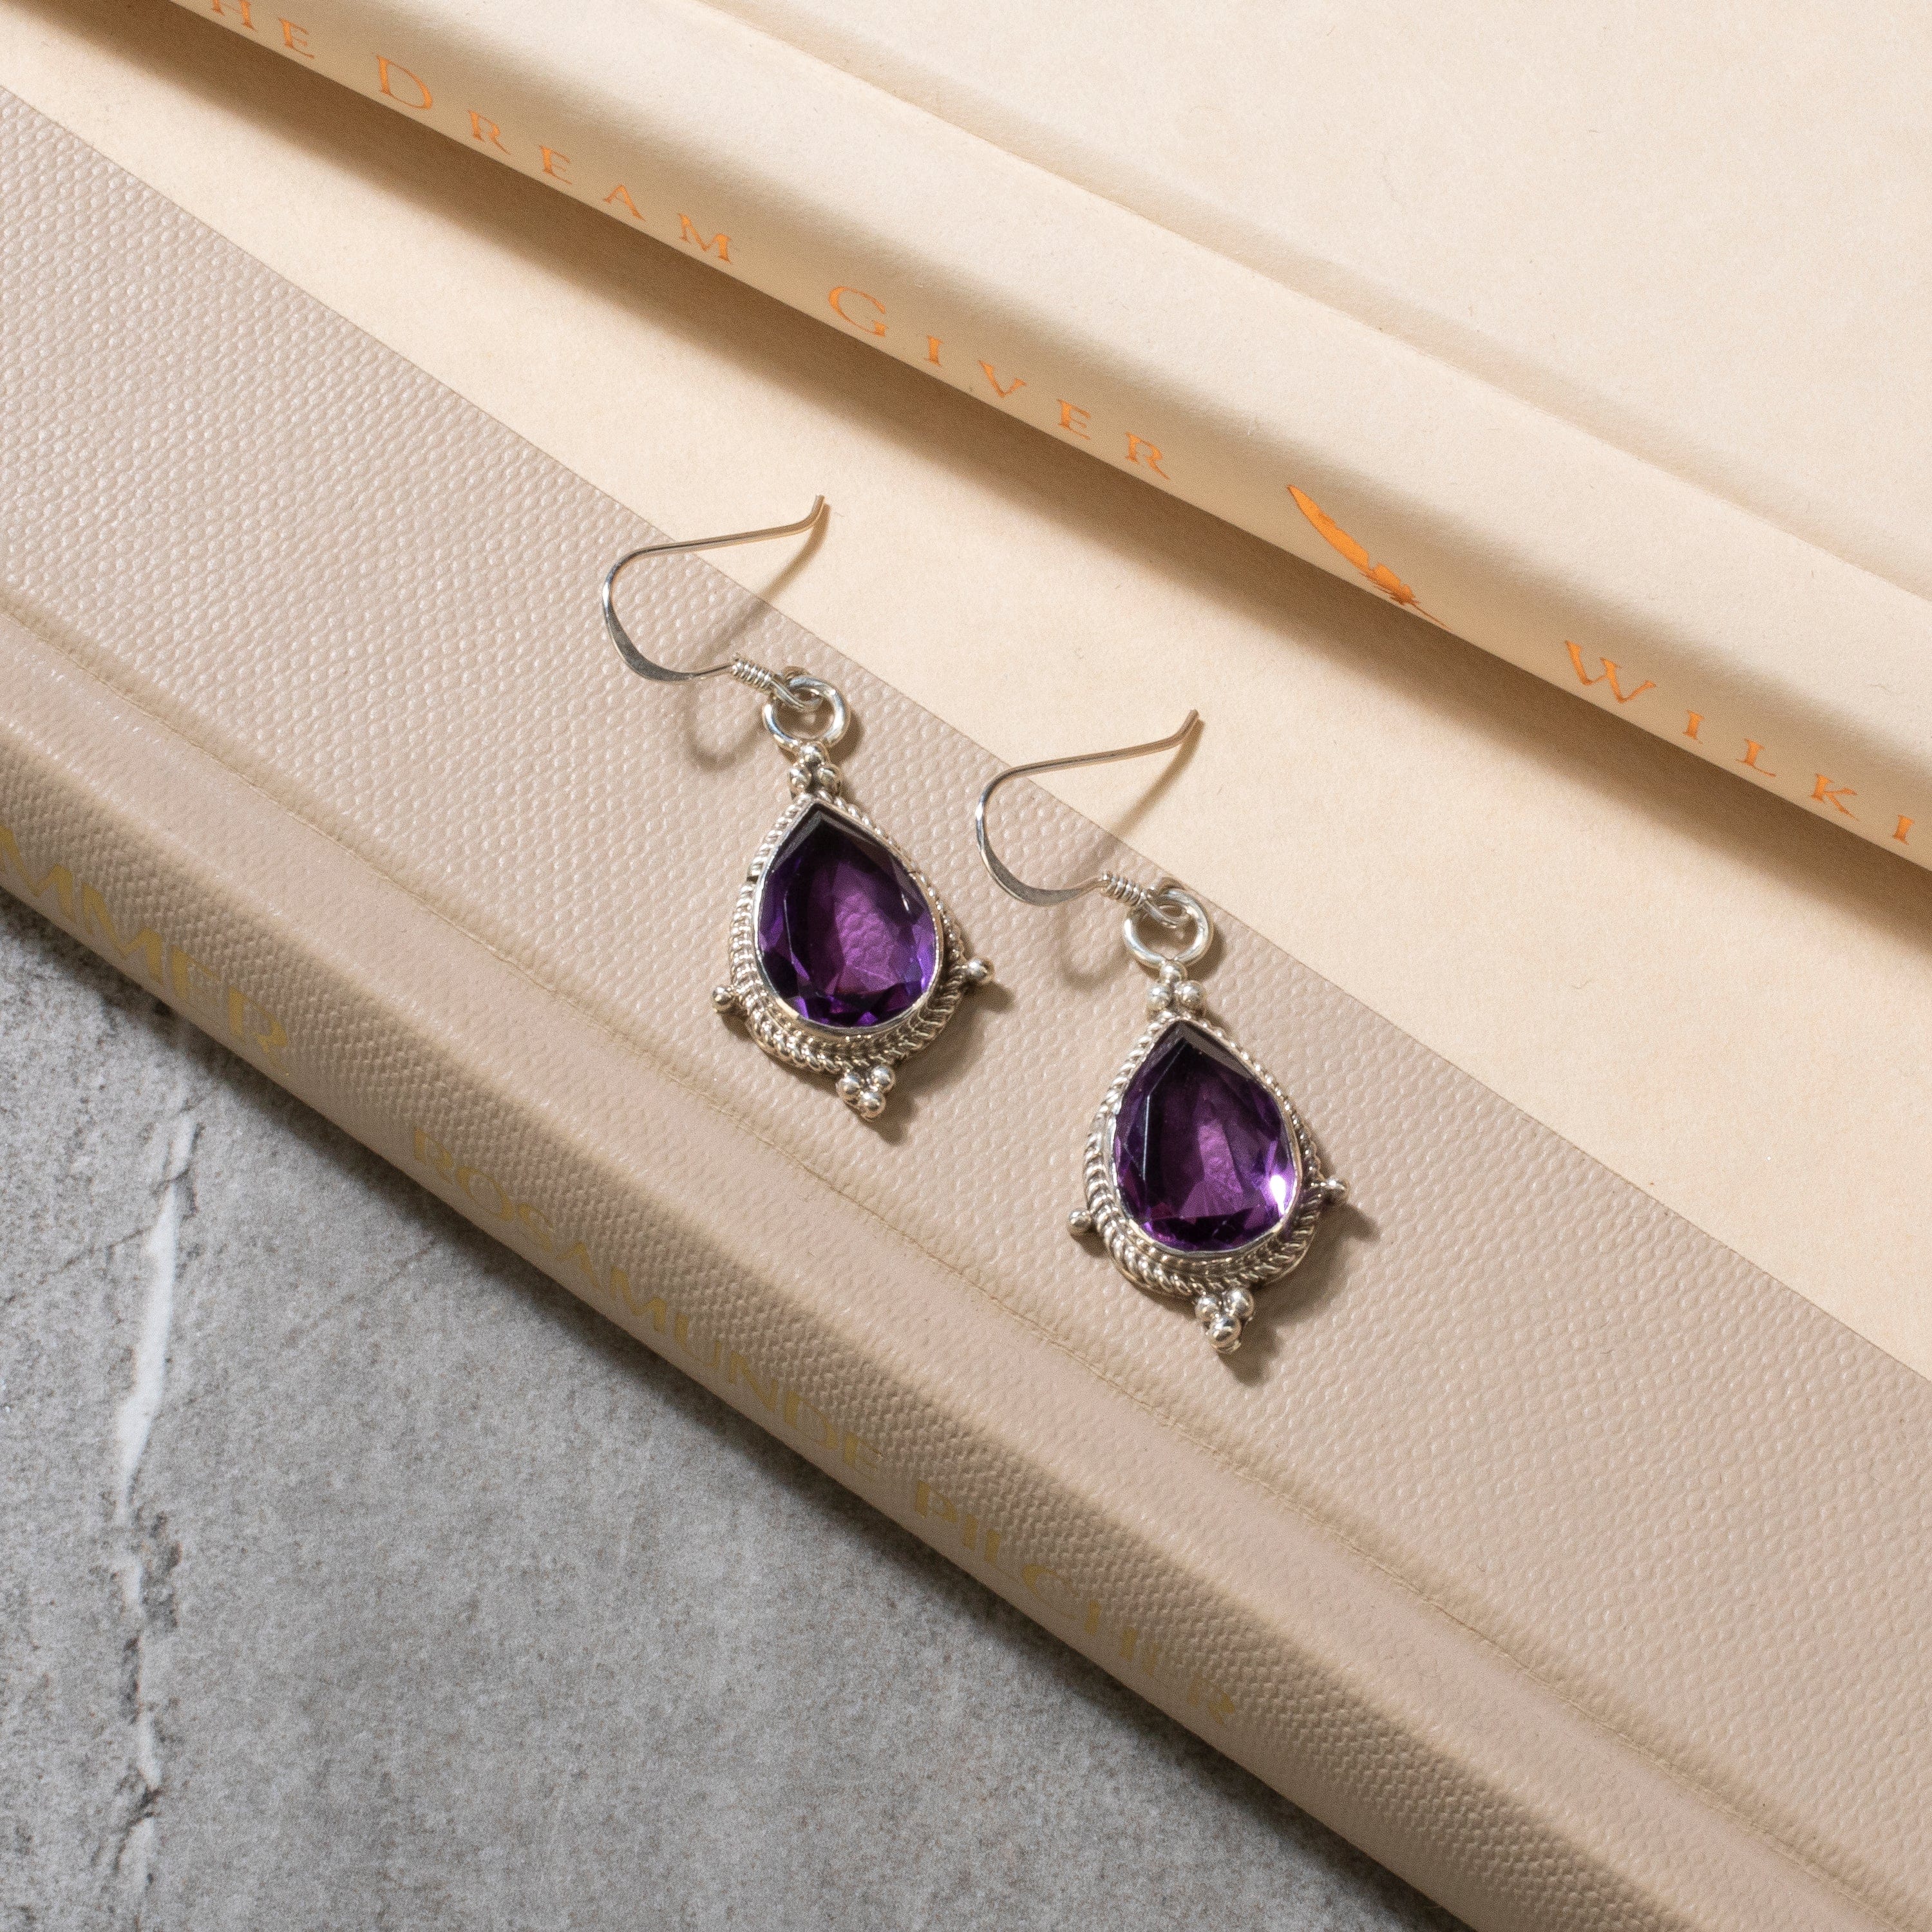 Kalifano Native American Jewelry Amethyst Teardrop Navajo USA Native American Made 925 Sterling Silver Earrings with French Hook NAE500.008